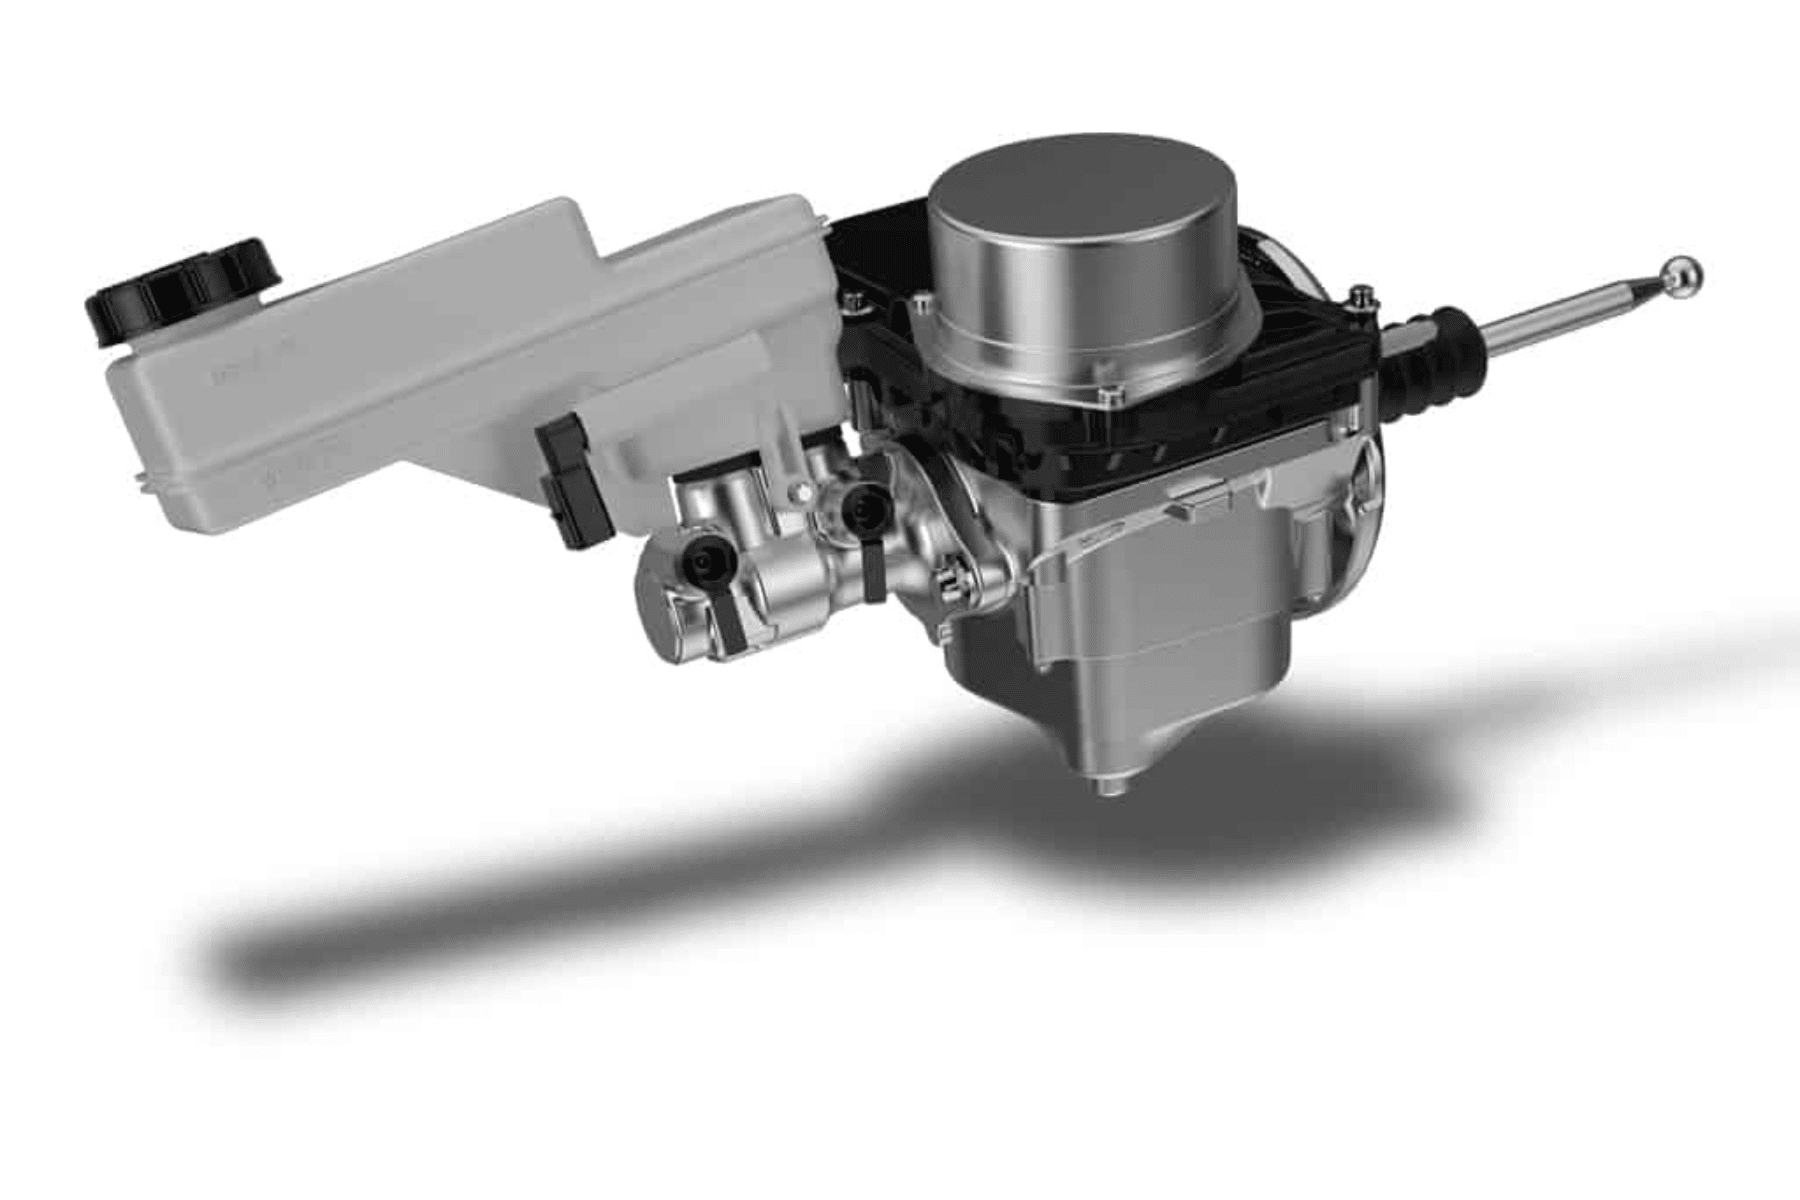 ZF introduced the TRW Electronic Brake Booster into the aftermarket